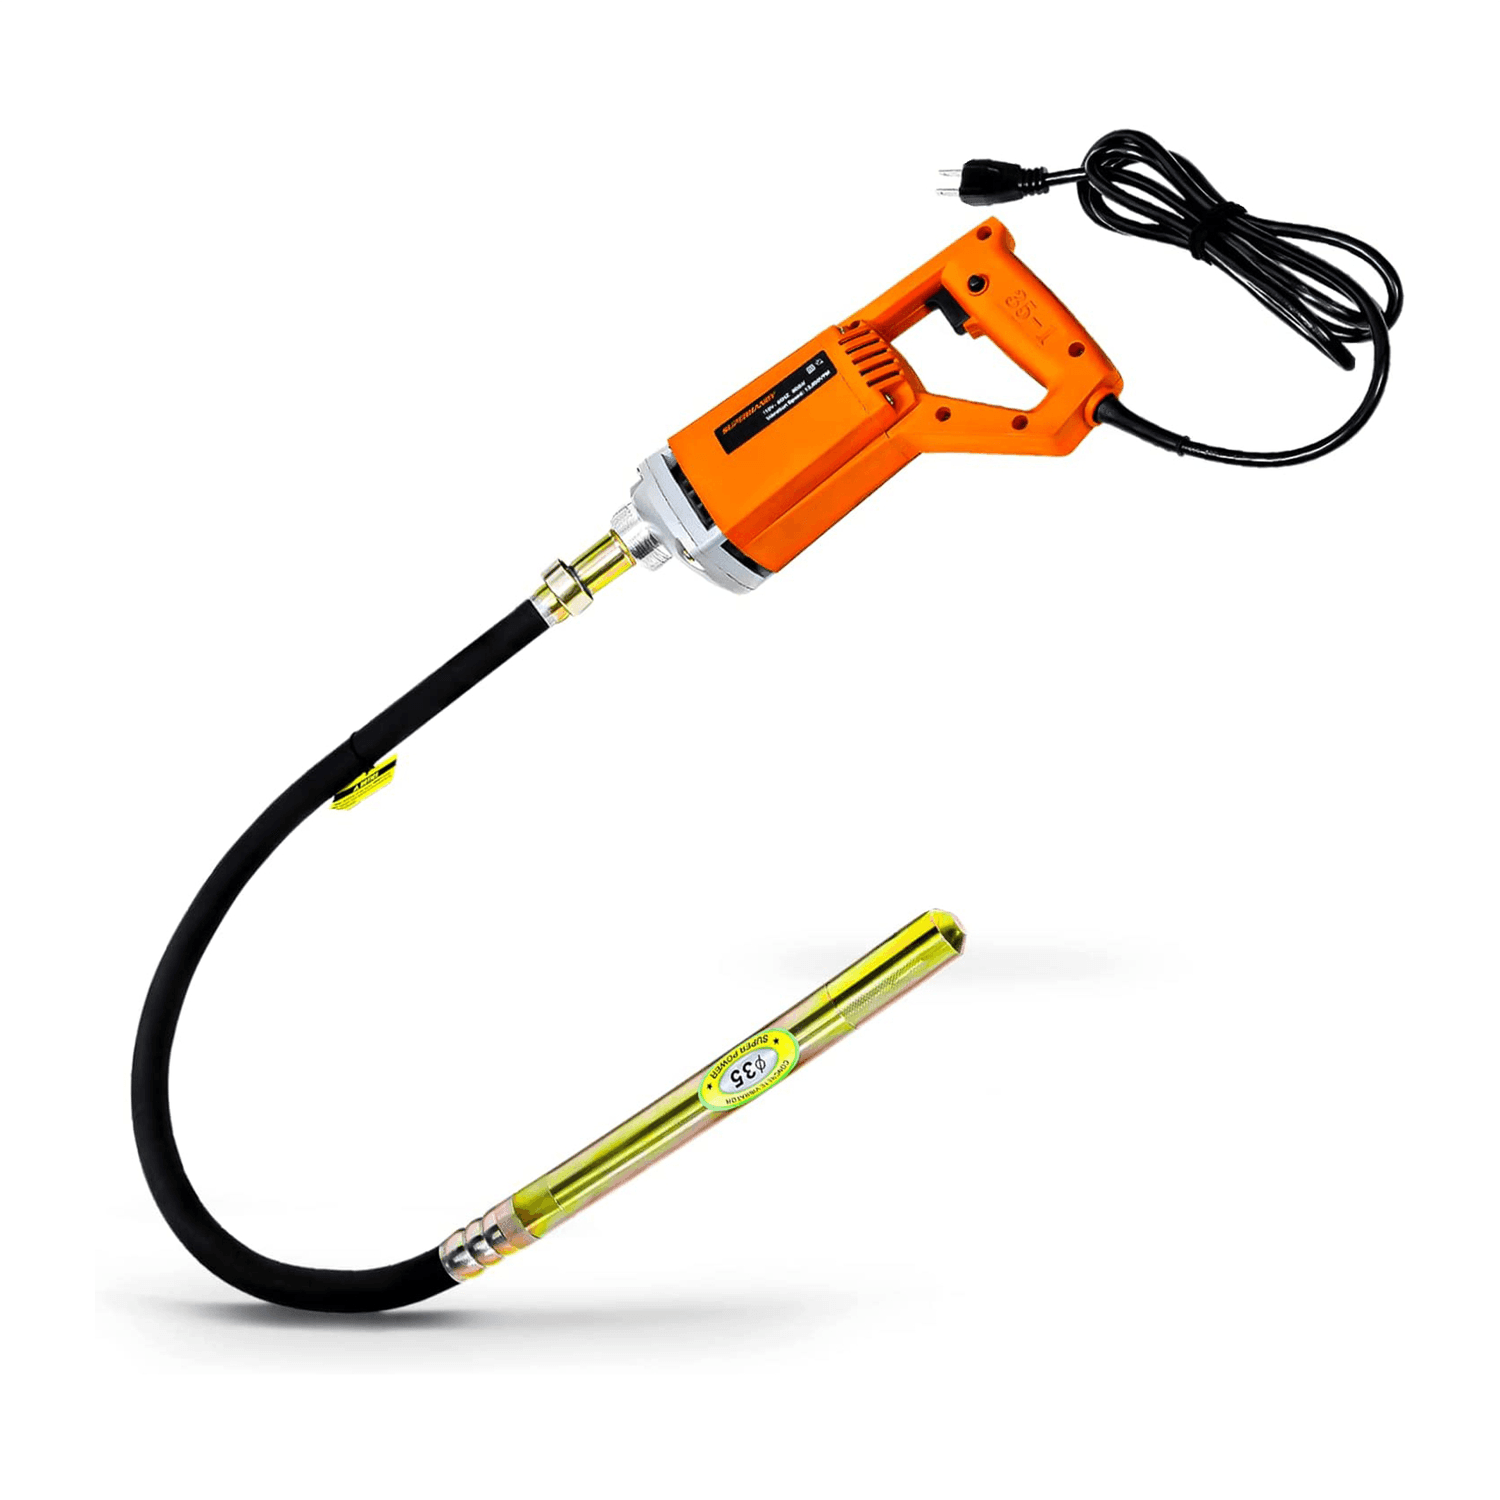 SuperHandy Electric Power Concrete Vibrator - 120V Corded, For Solidifying Concrete, Air Bubble Removal - DIY Tools by GreatCircleUS